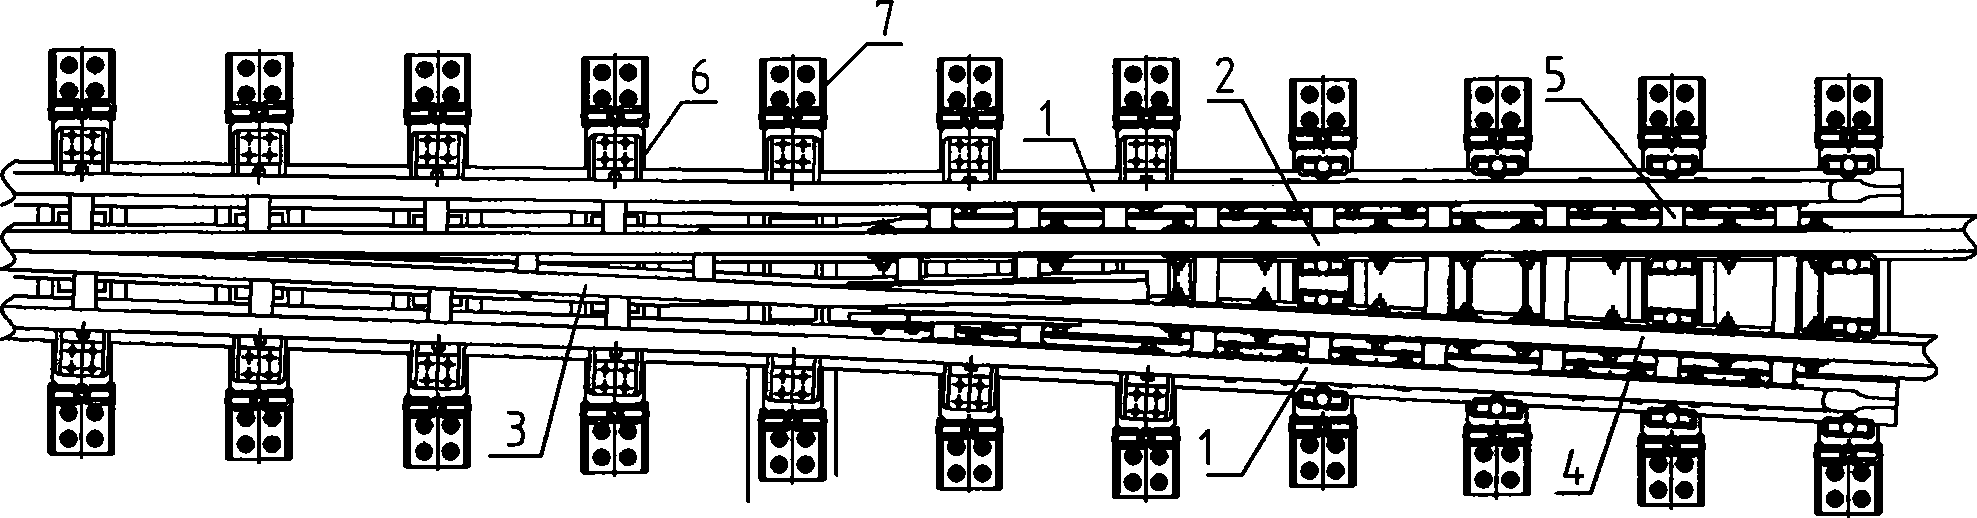 Vertical rail brace and rail wing fixation system composed of the vertical rail brace